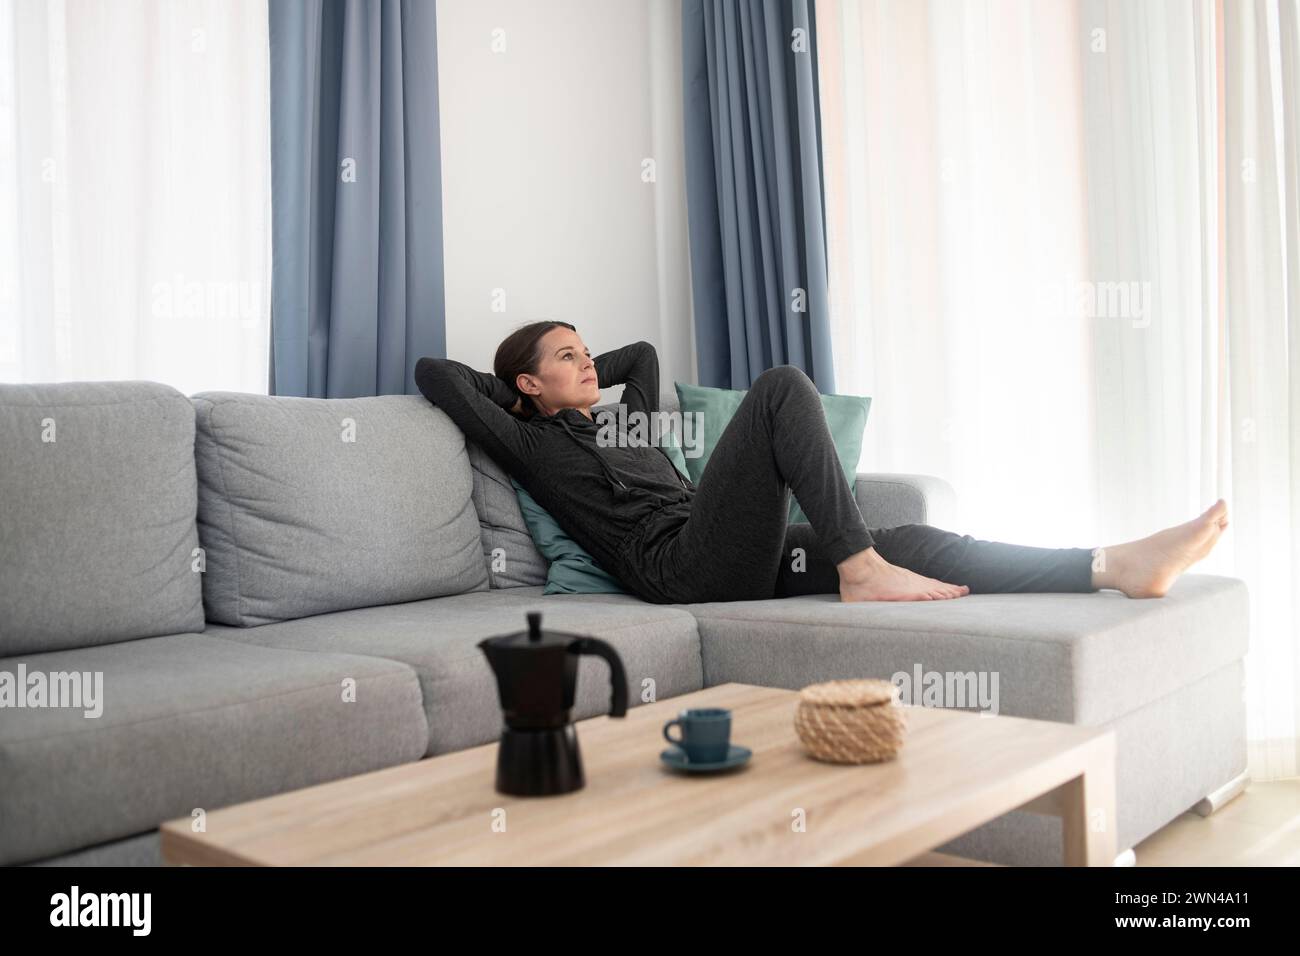 Woman with her feet up on the sofa, relaxing at home, hands behind head. Stock Photo